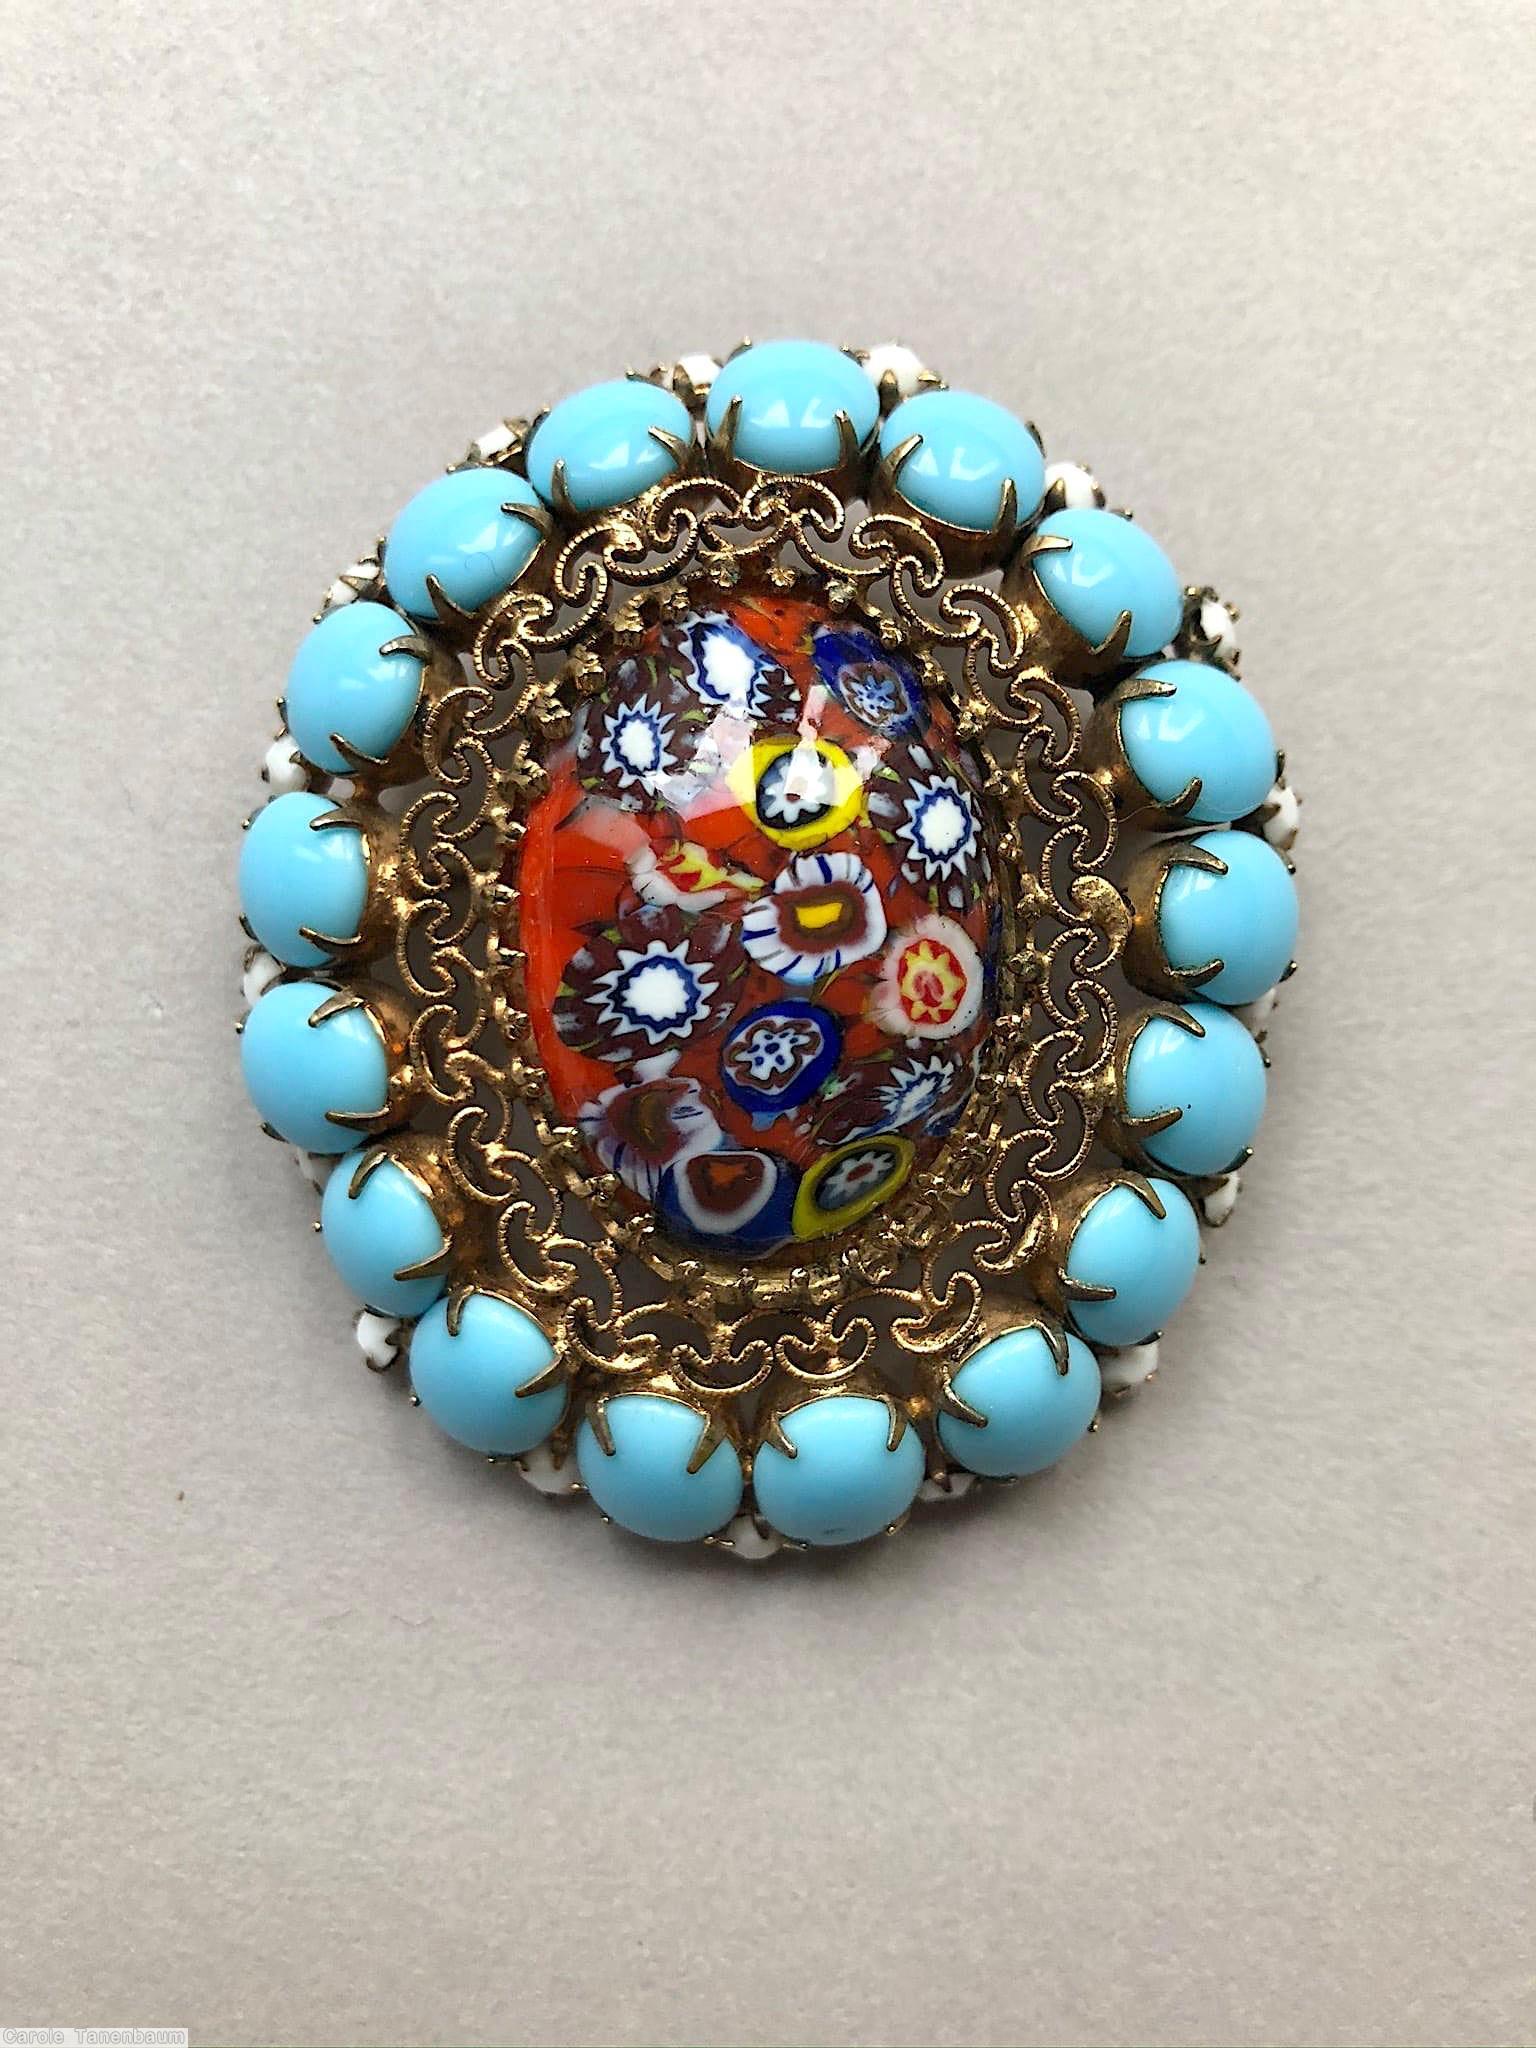 Schreiner large oval millefiori center domed oval pin filigree 17 oval cab side opaque baby blue white seeds goldtone jewelry